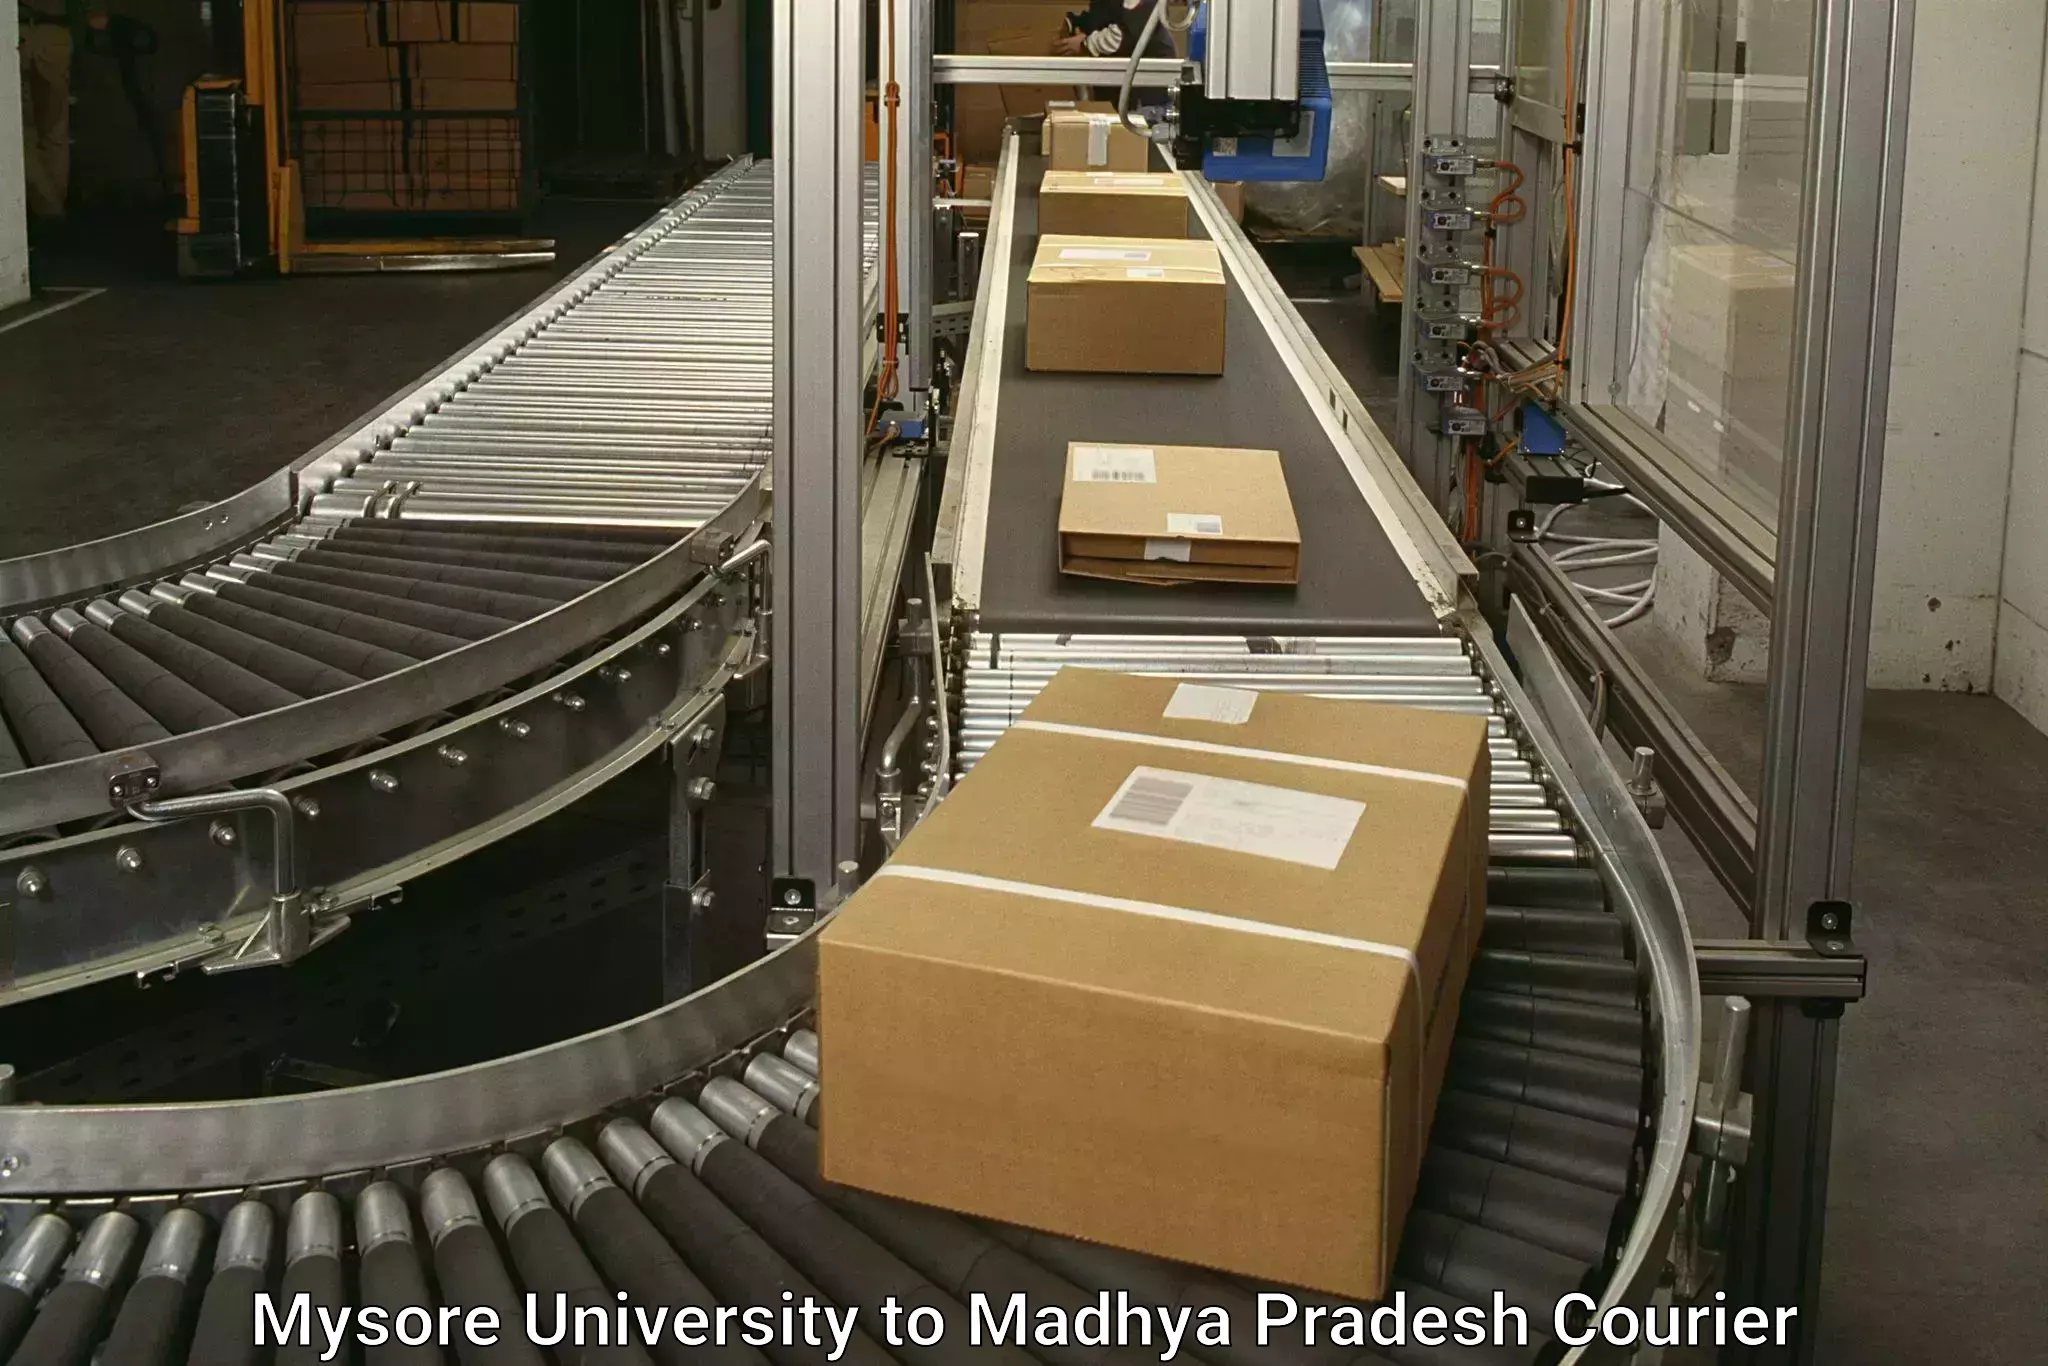 State-of-the-art courier technology Mysore University to Dola